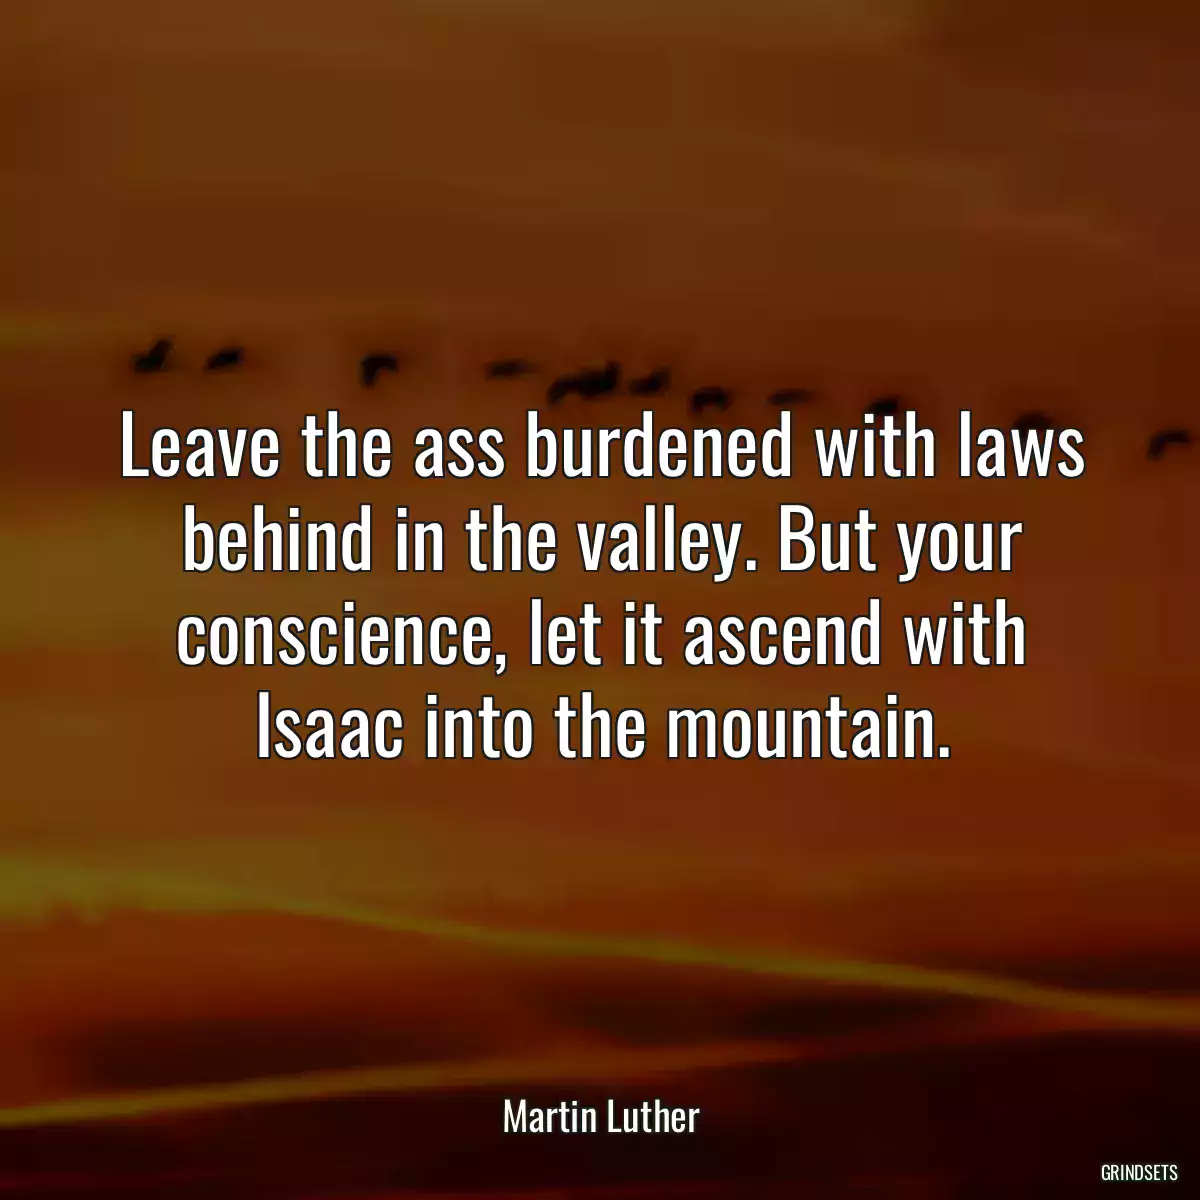 Leave the ass burdened with laws behind in the valley. But your conscience, let it ascend with Isaac into the mountain.